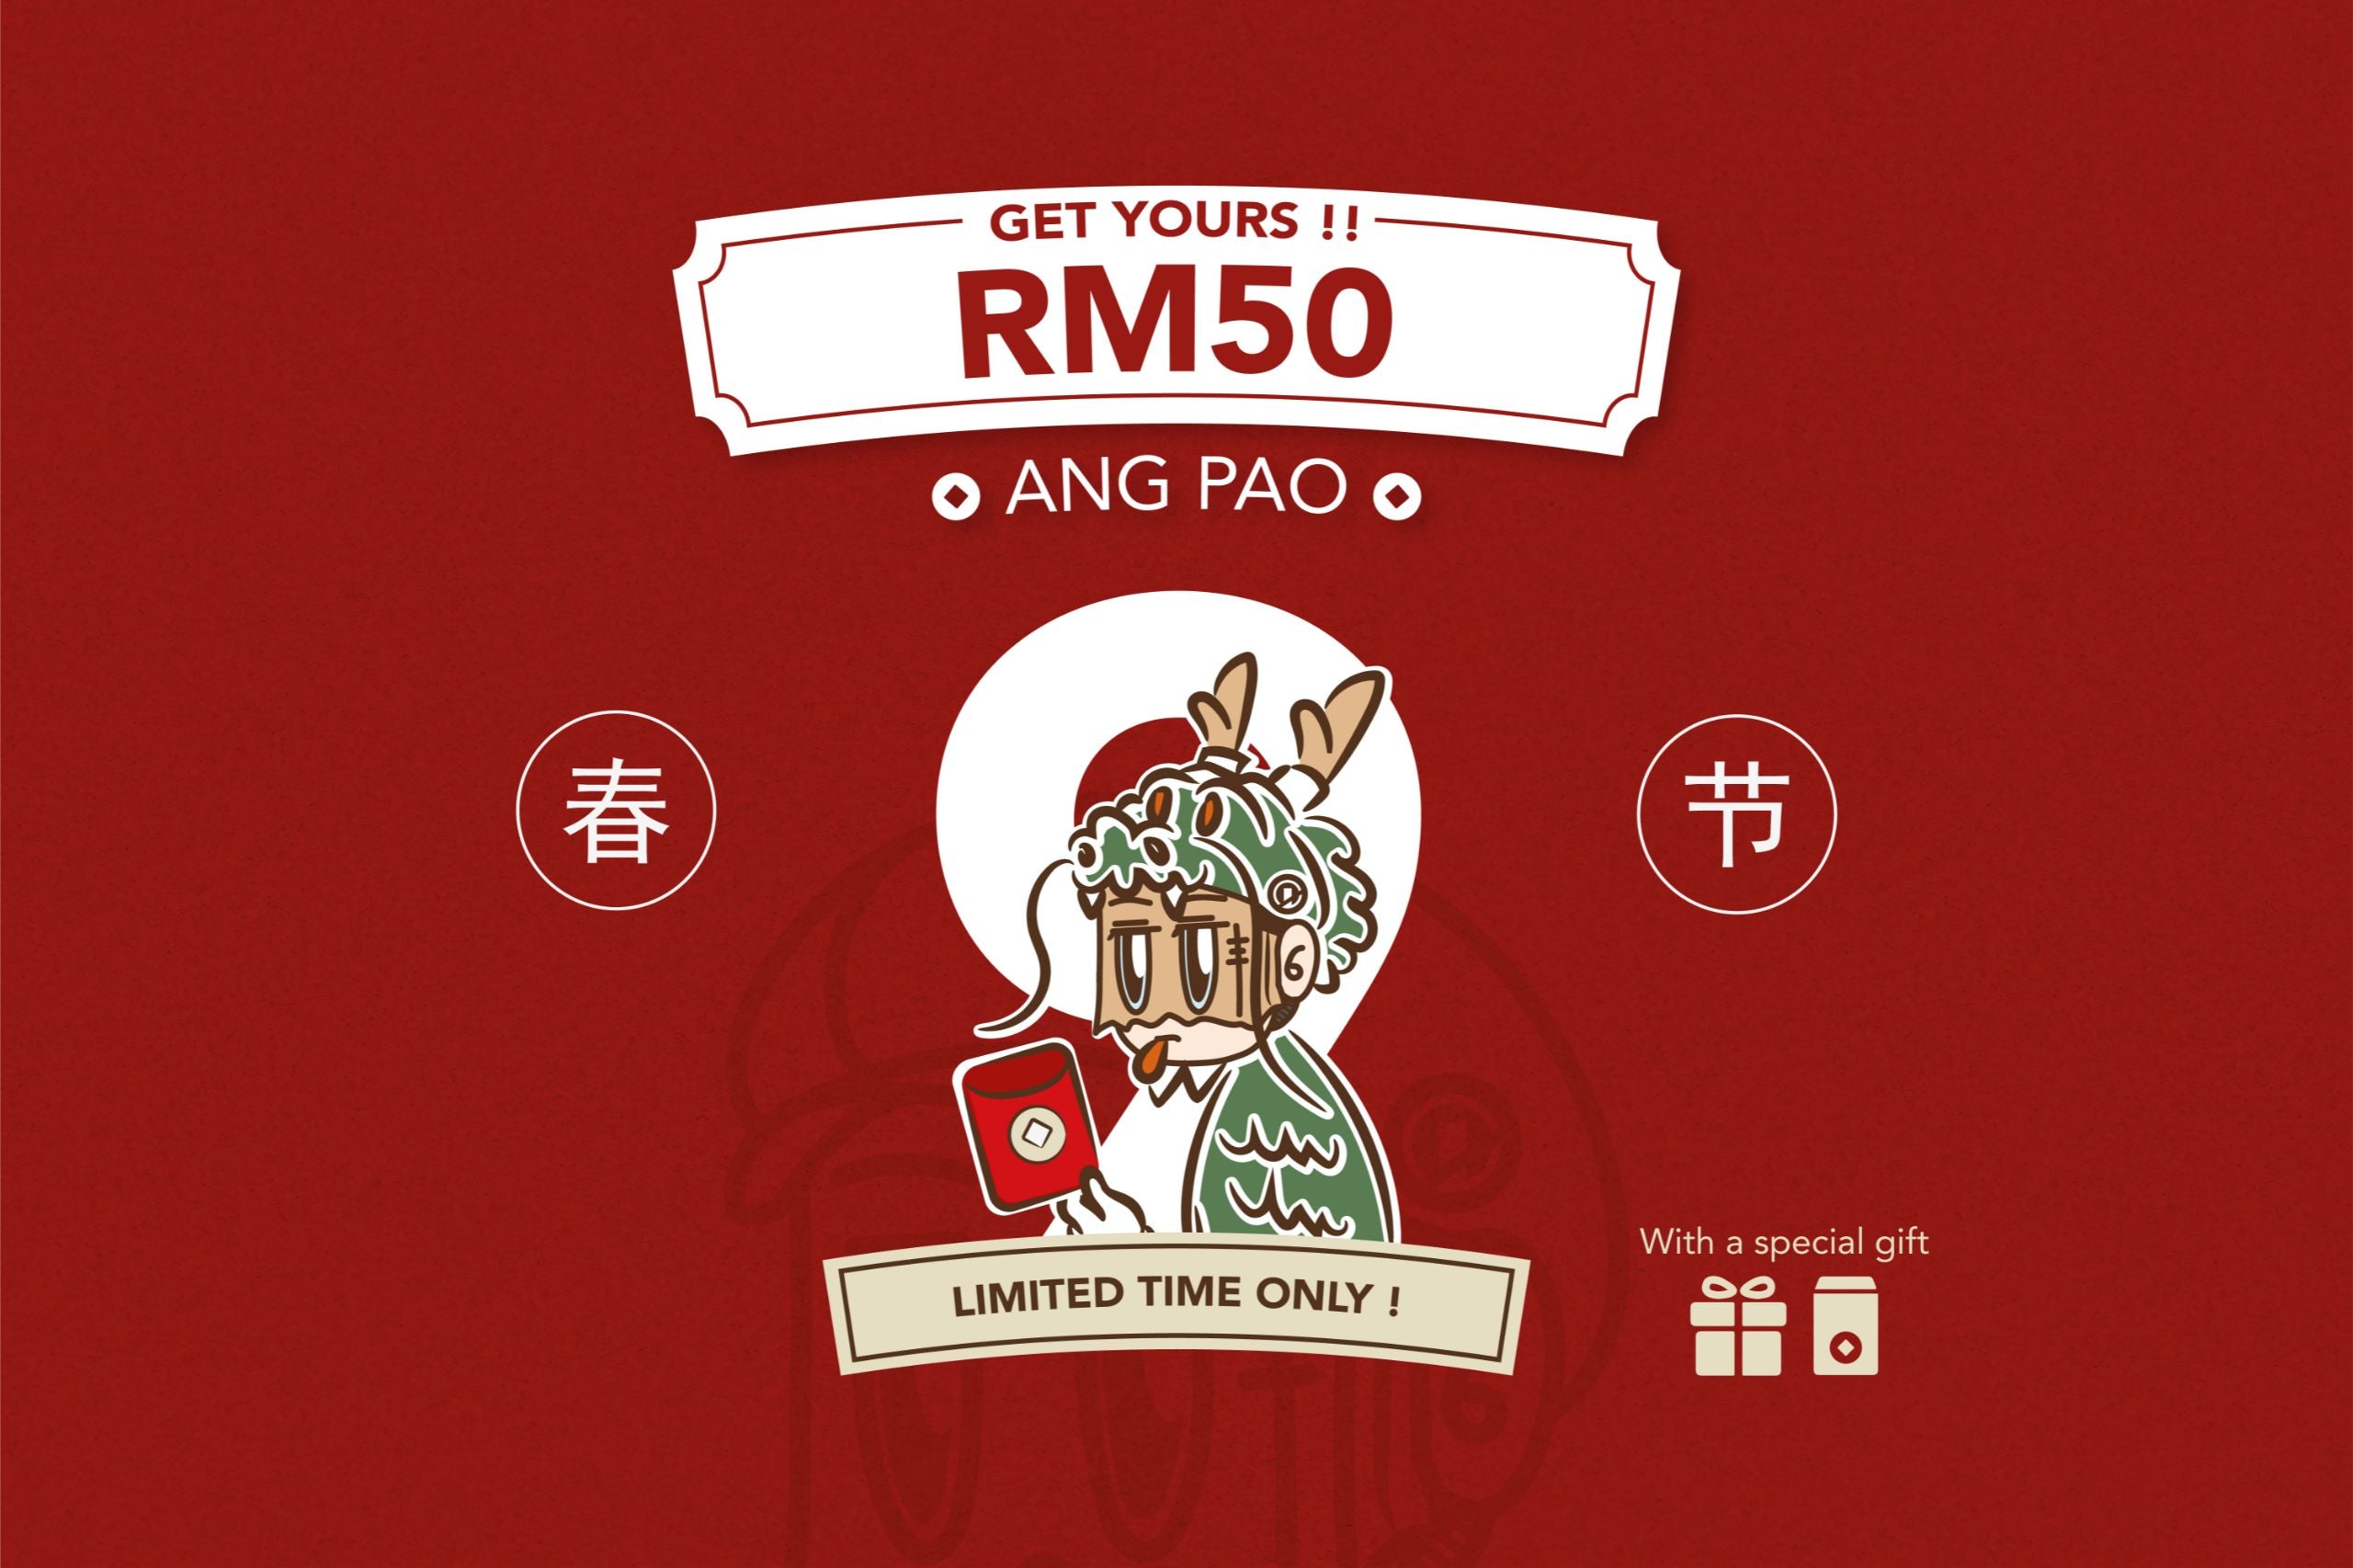 24 - Daily Dose of Luck! Catch the RM50 AngPow!